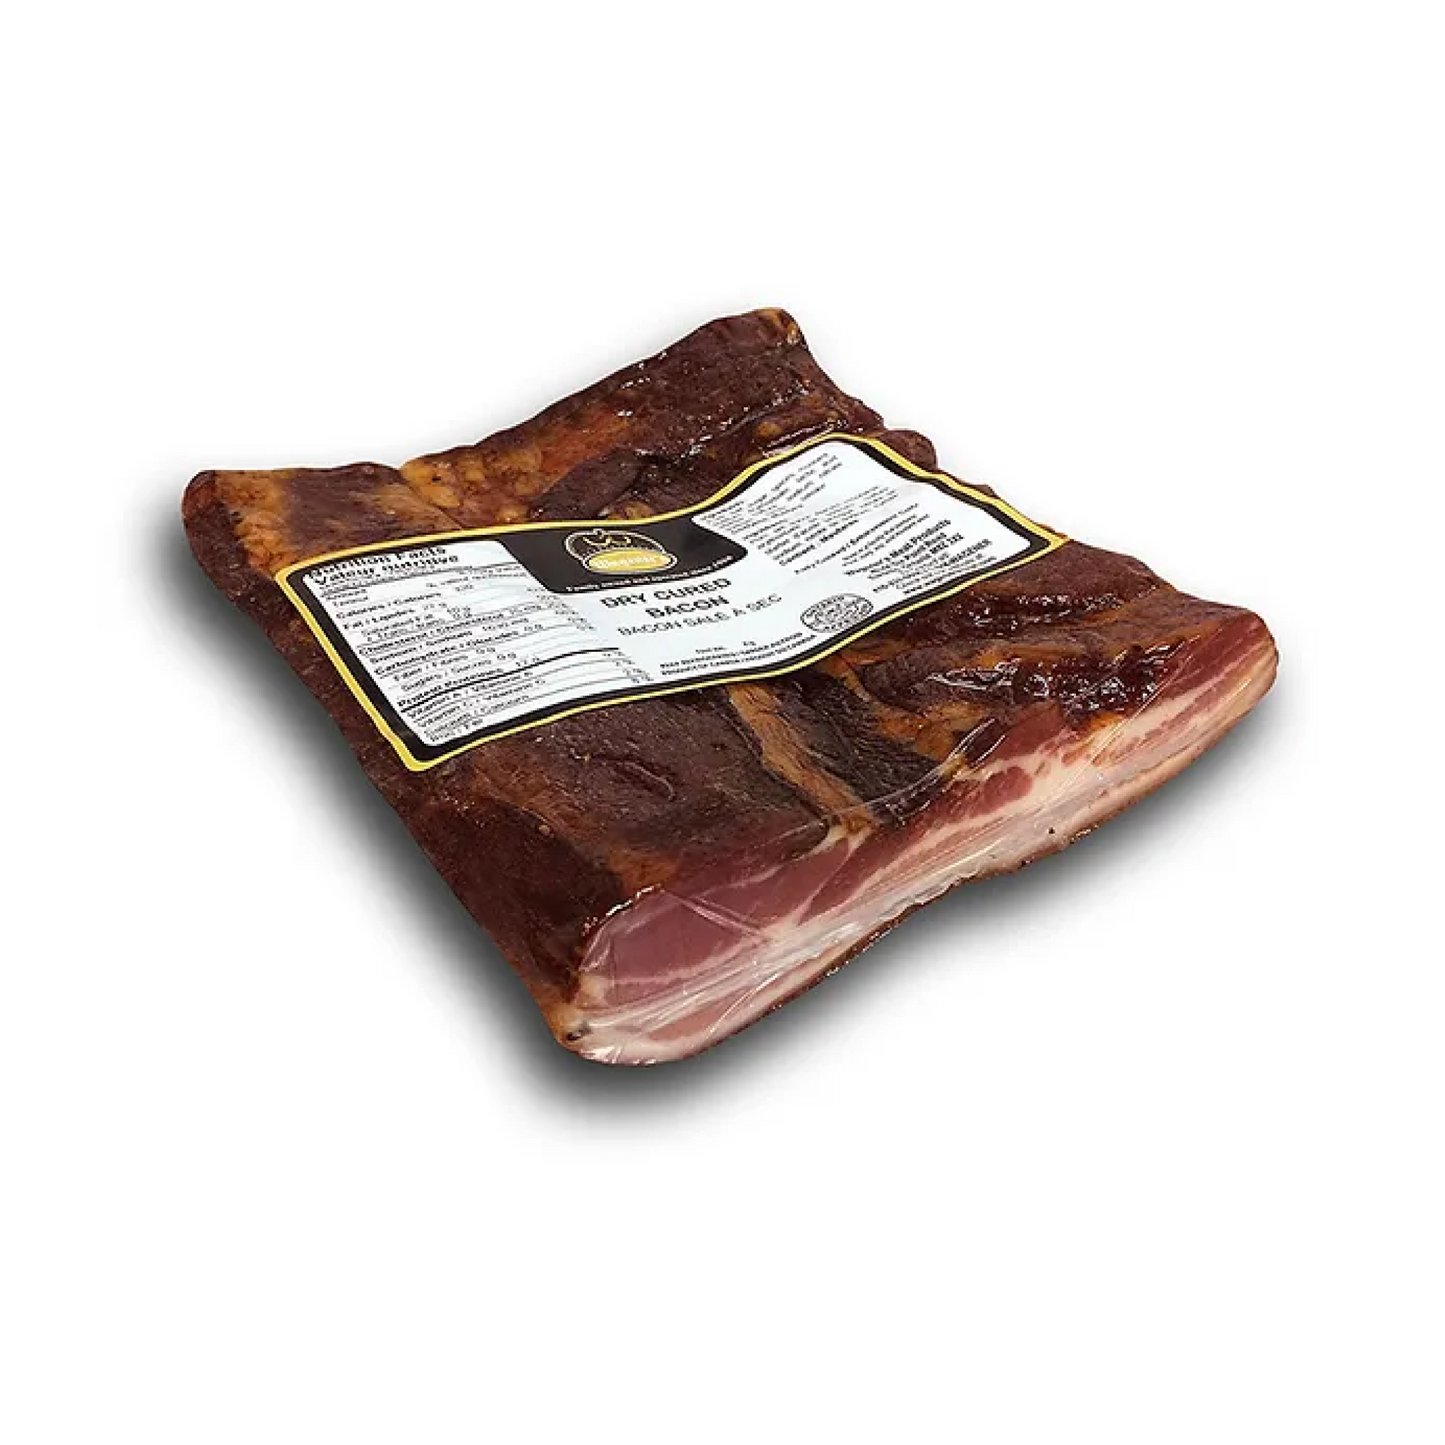 Wagener's Dry Cured Bacon